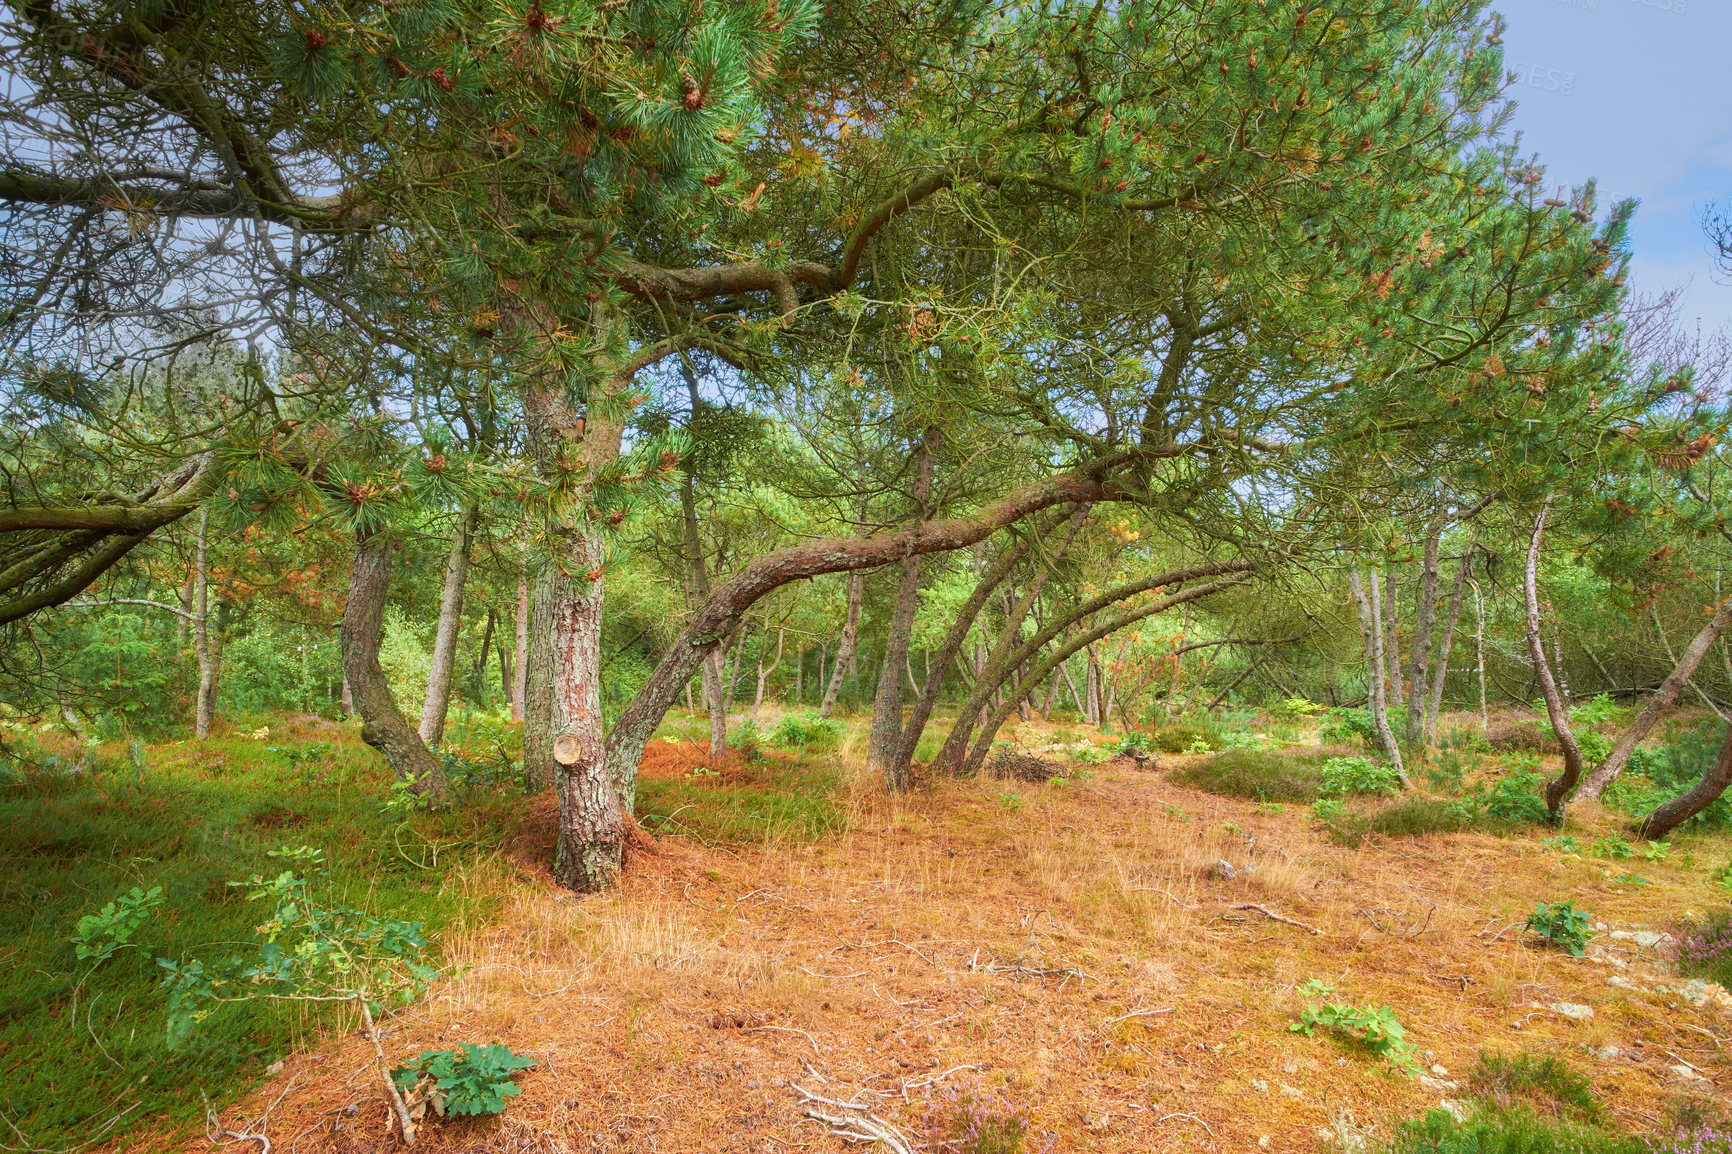 Buy stock photo Forest with bent trees and green plants in Autumn. Landscape of many pine trees and branches in nature. Lots of uncultivated vegetation and shrubs growing in a secluded woodland environment in Sweden